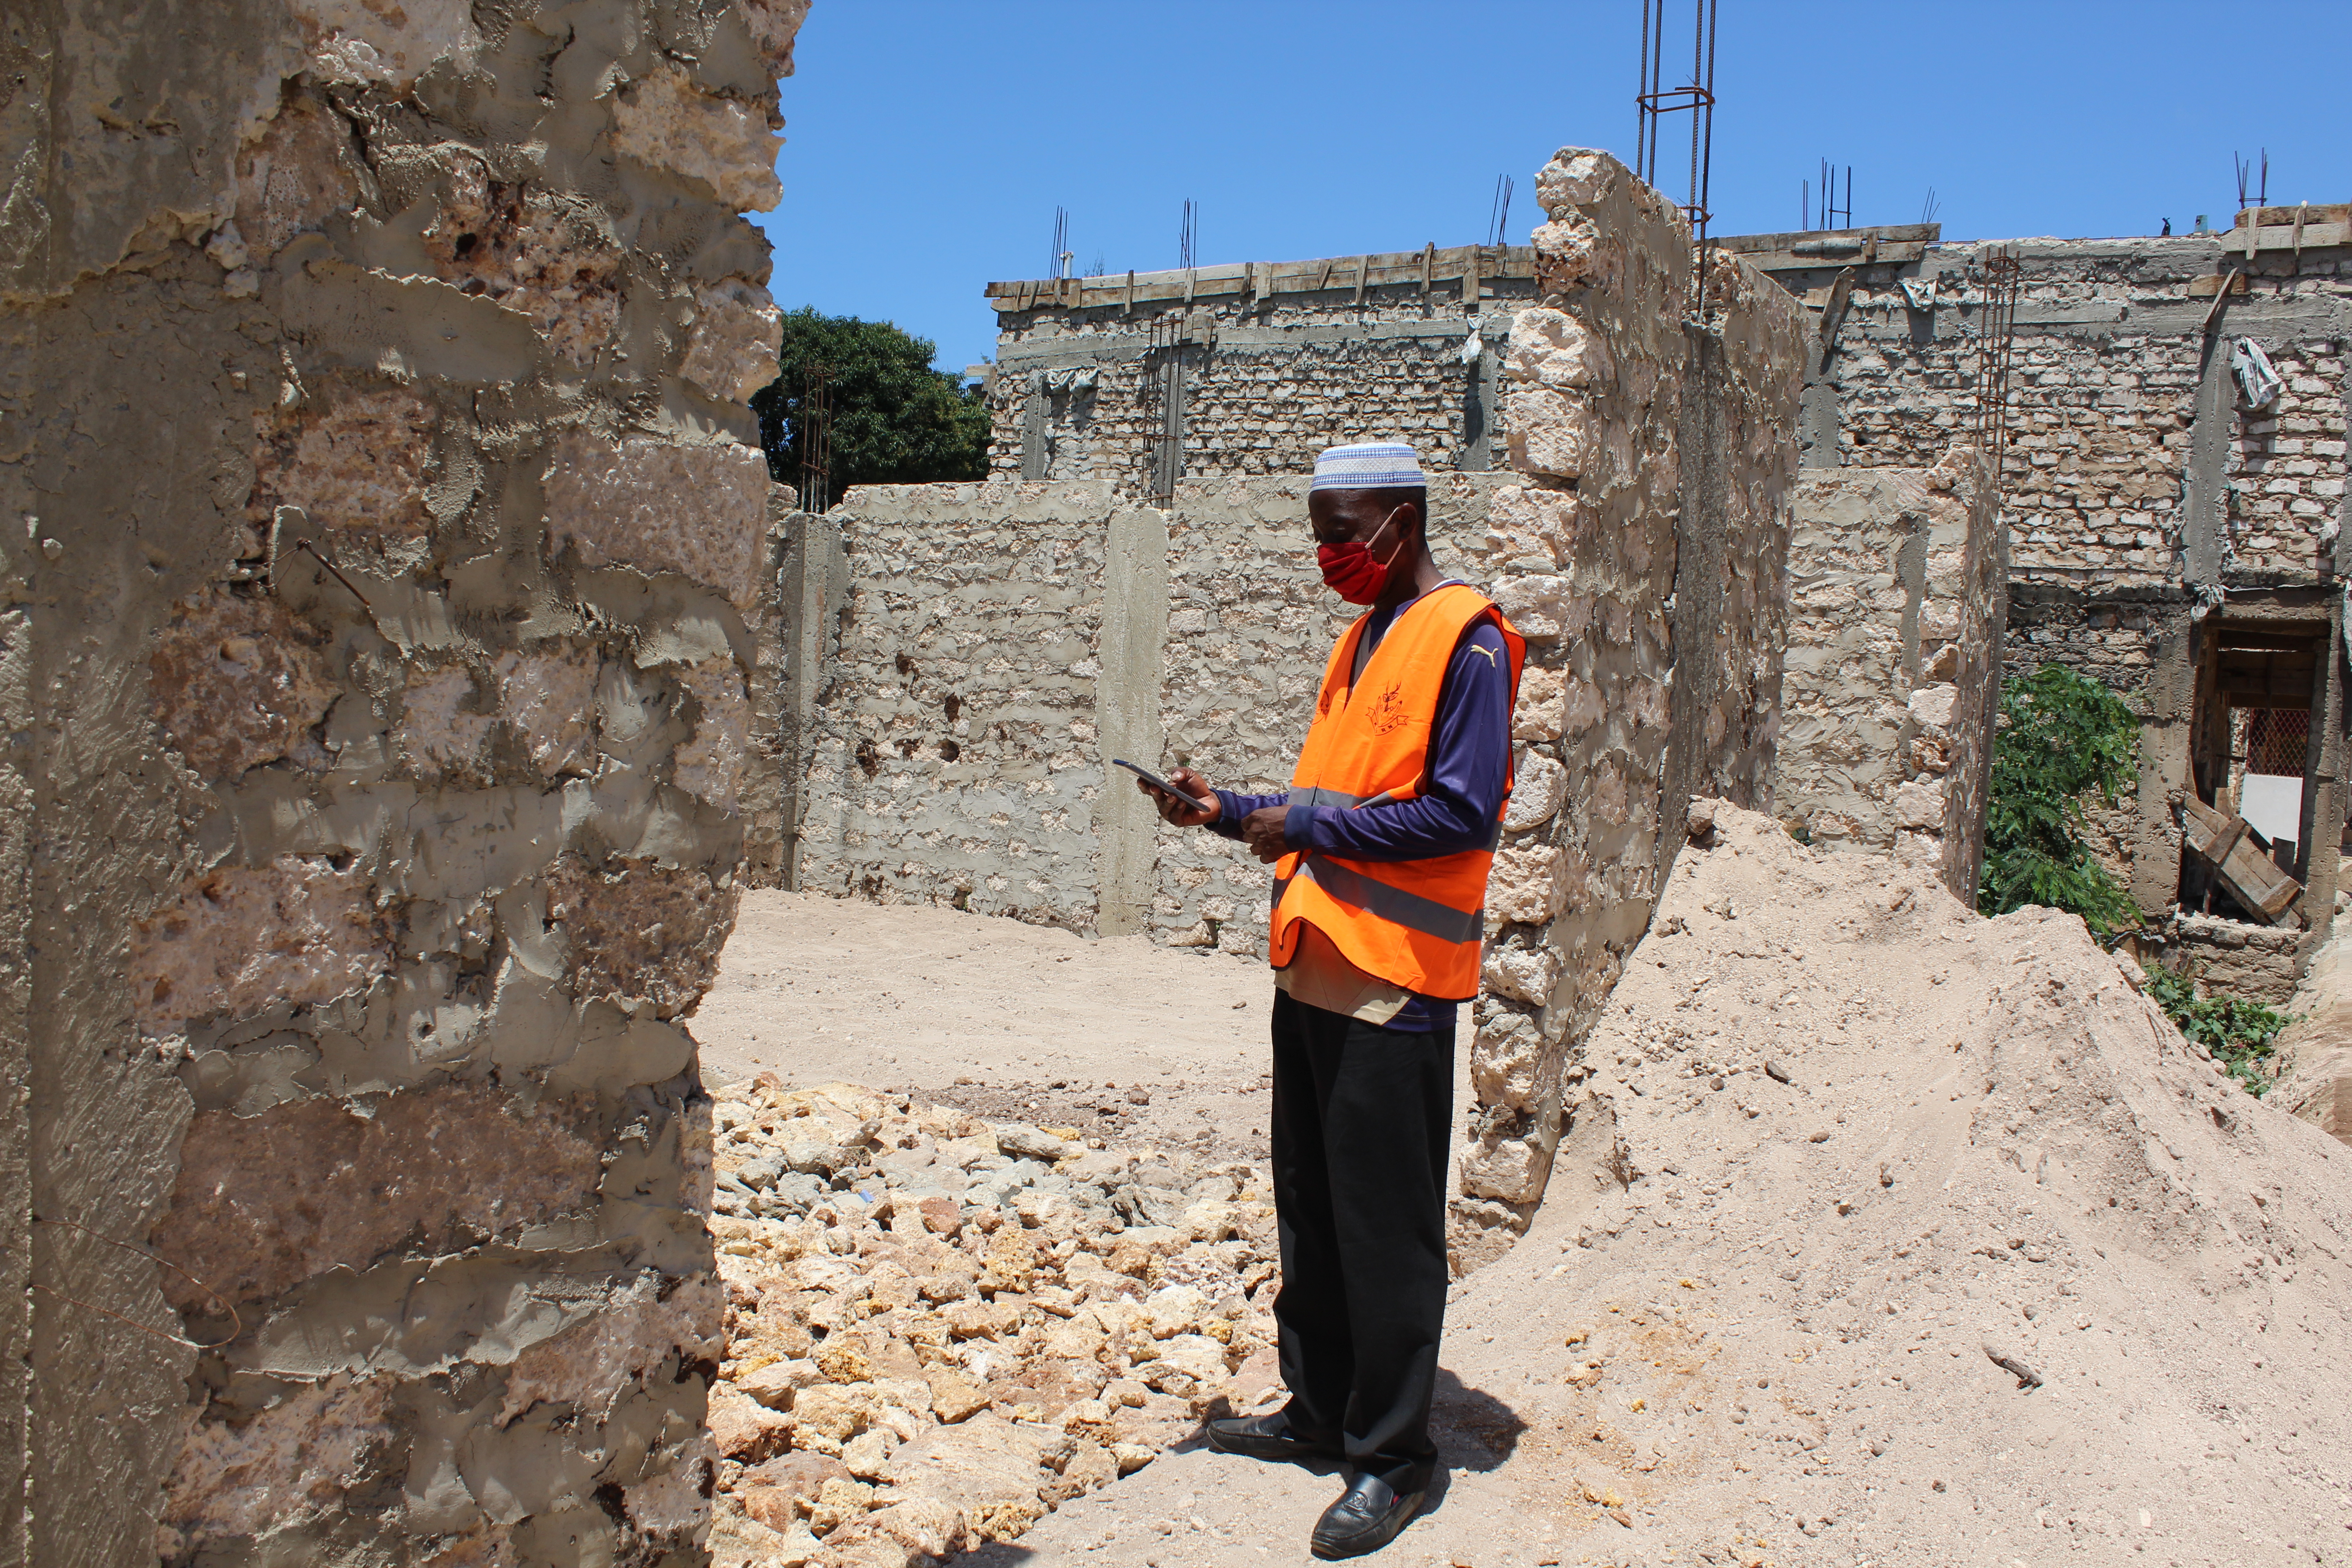 Community monitor wearing PPE and checking that construction is continuing in accordance with plans